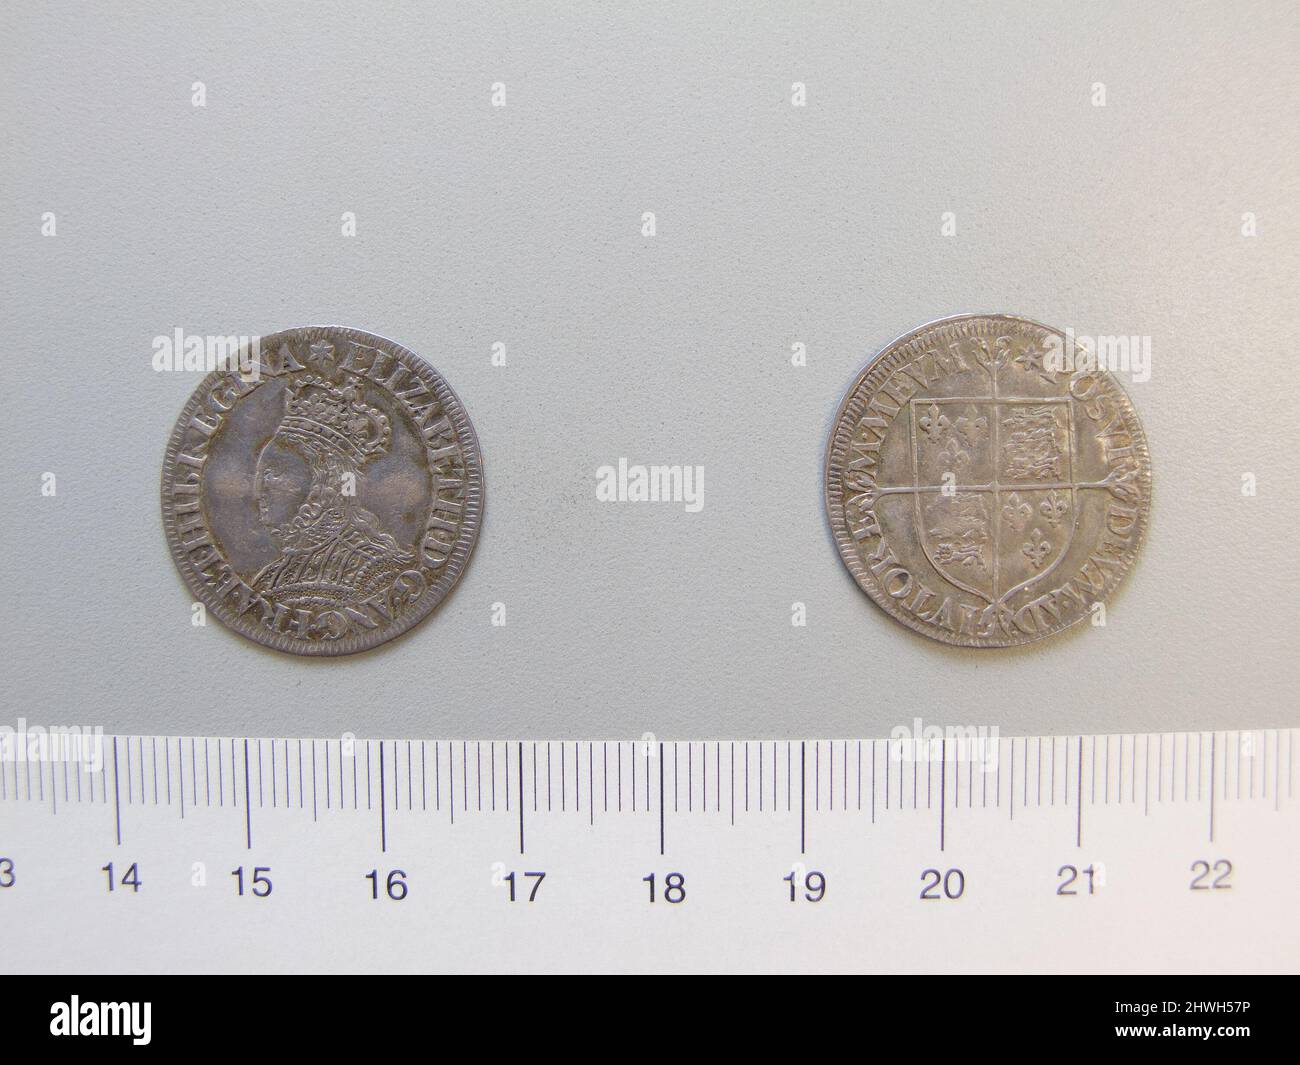 1 Groat of Elizabeth I, Queen of England from London. Ruler: Elizabeth I, Queen of England, British, 1533–1603, ruled 1558–1603 Mint: London Artist: Unknown Stock Photo